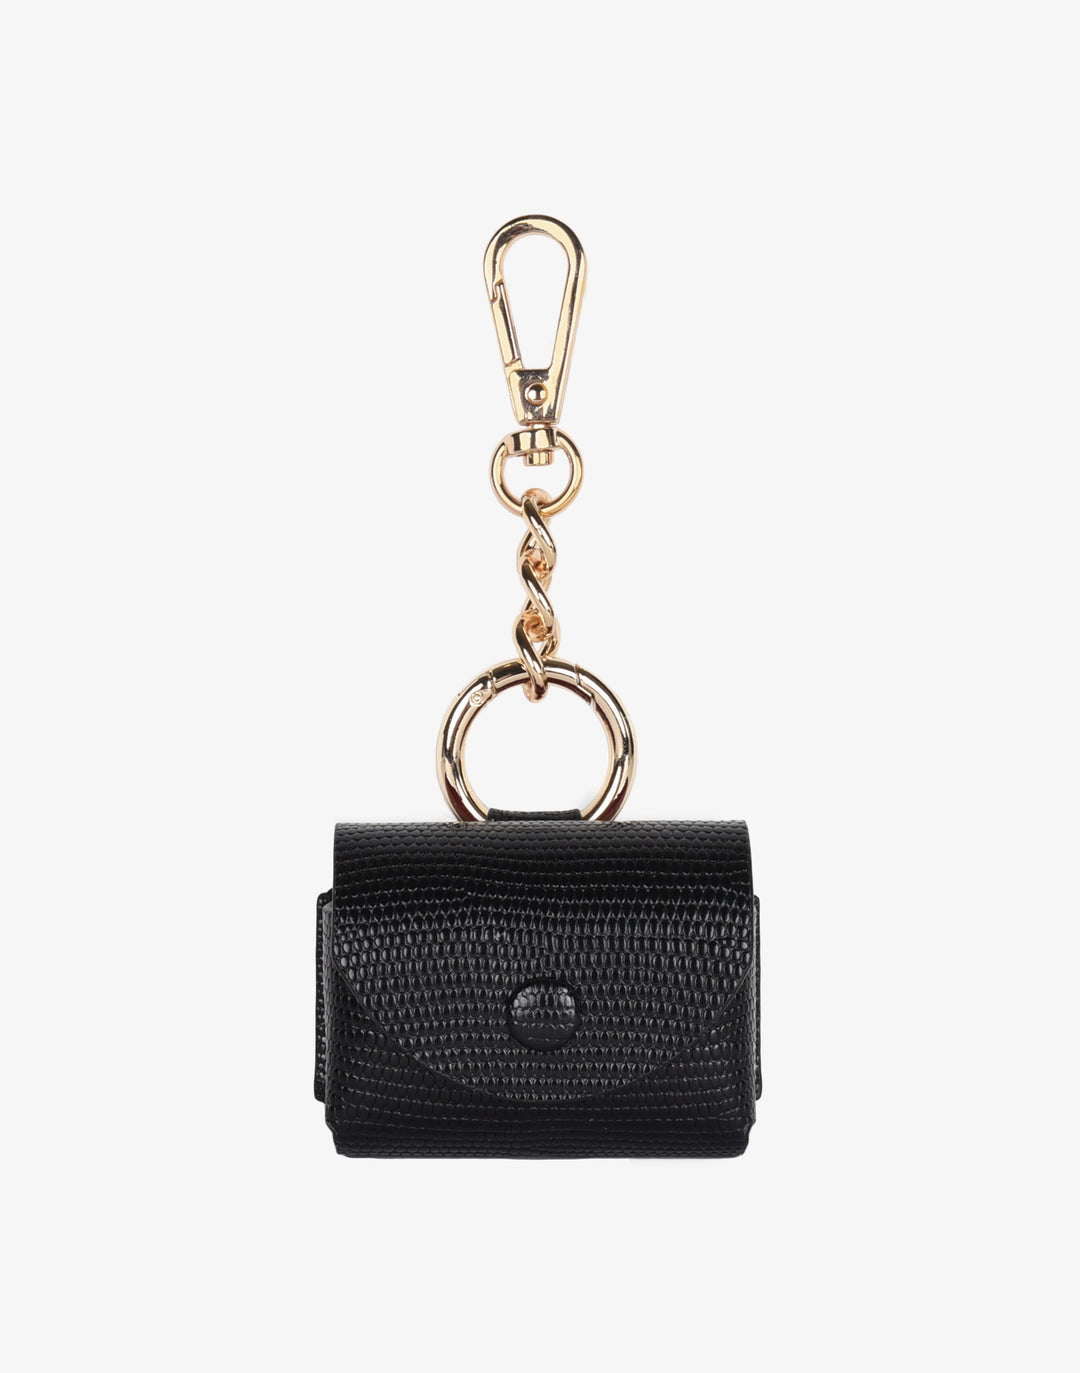 Airpods 3 Gucci Logo Leather Case - Black in Pakistan